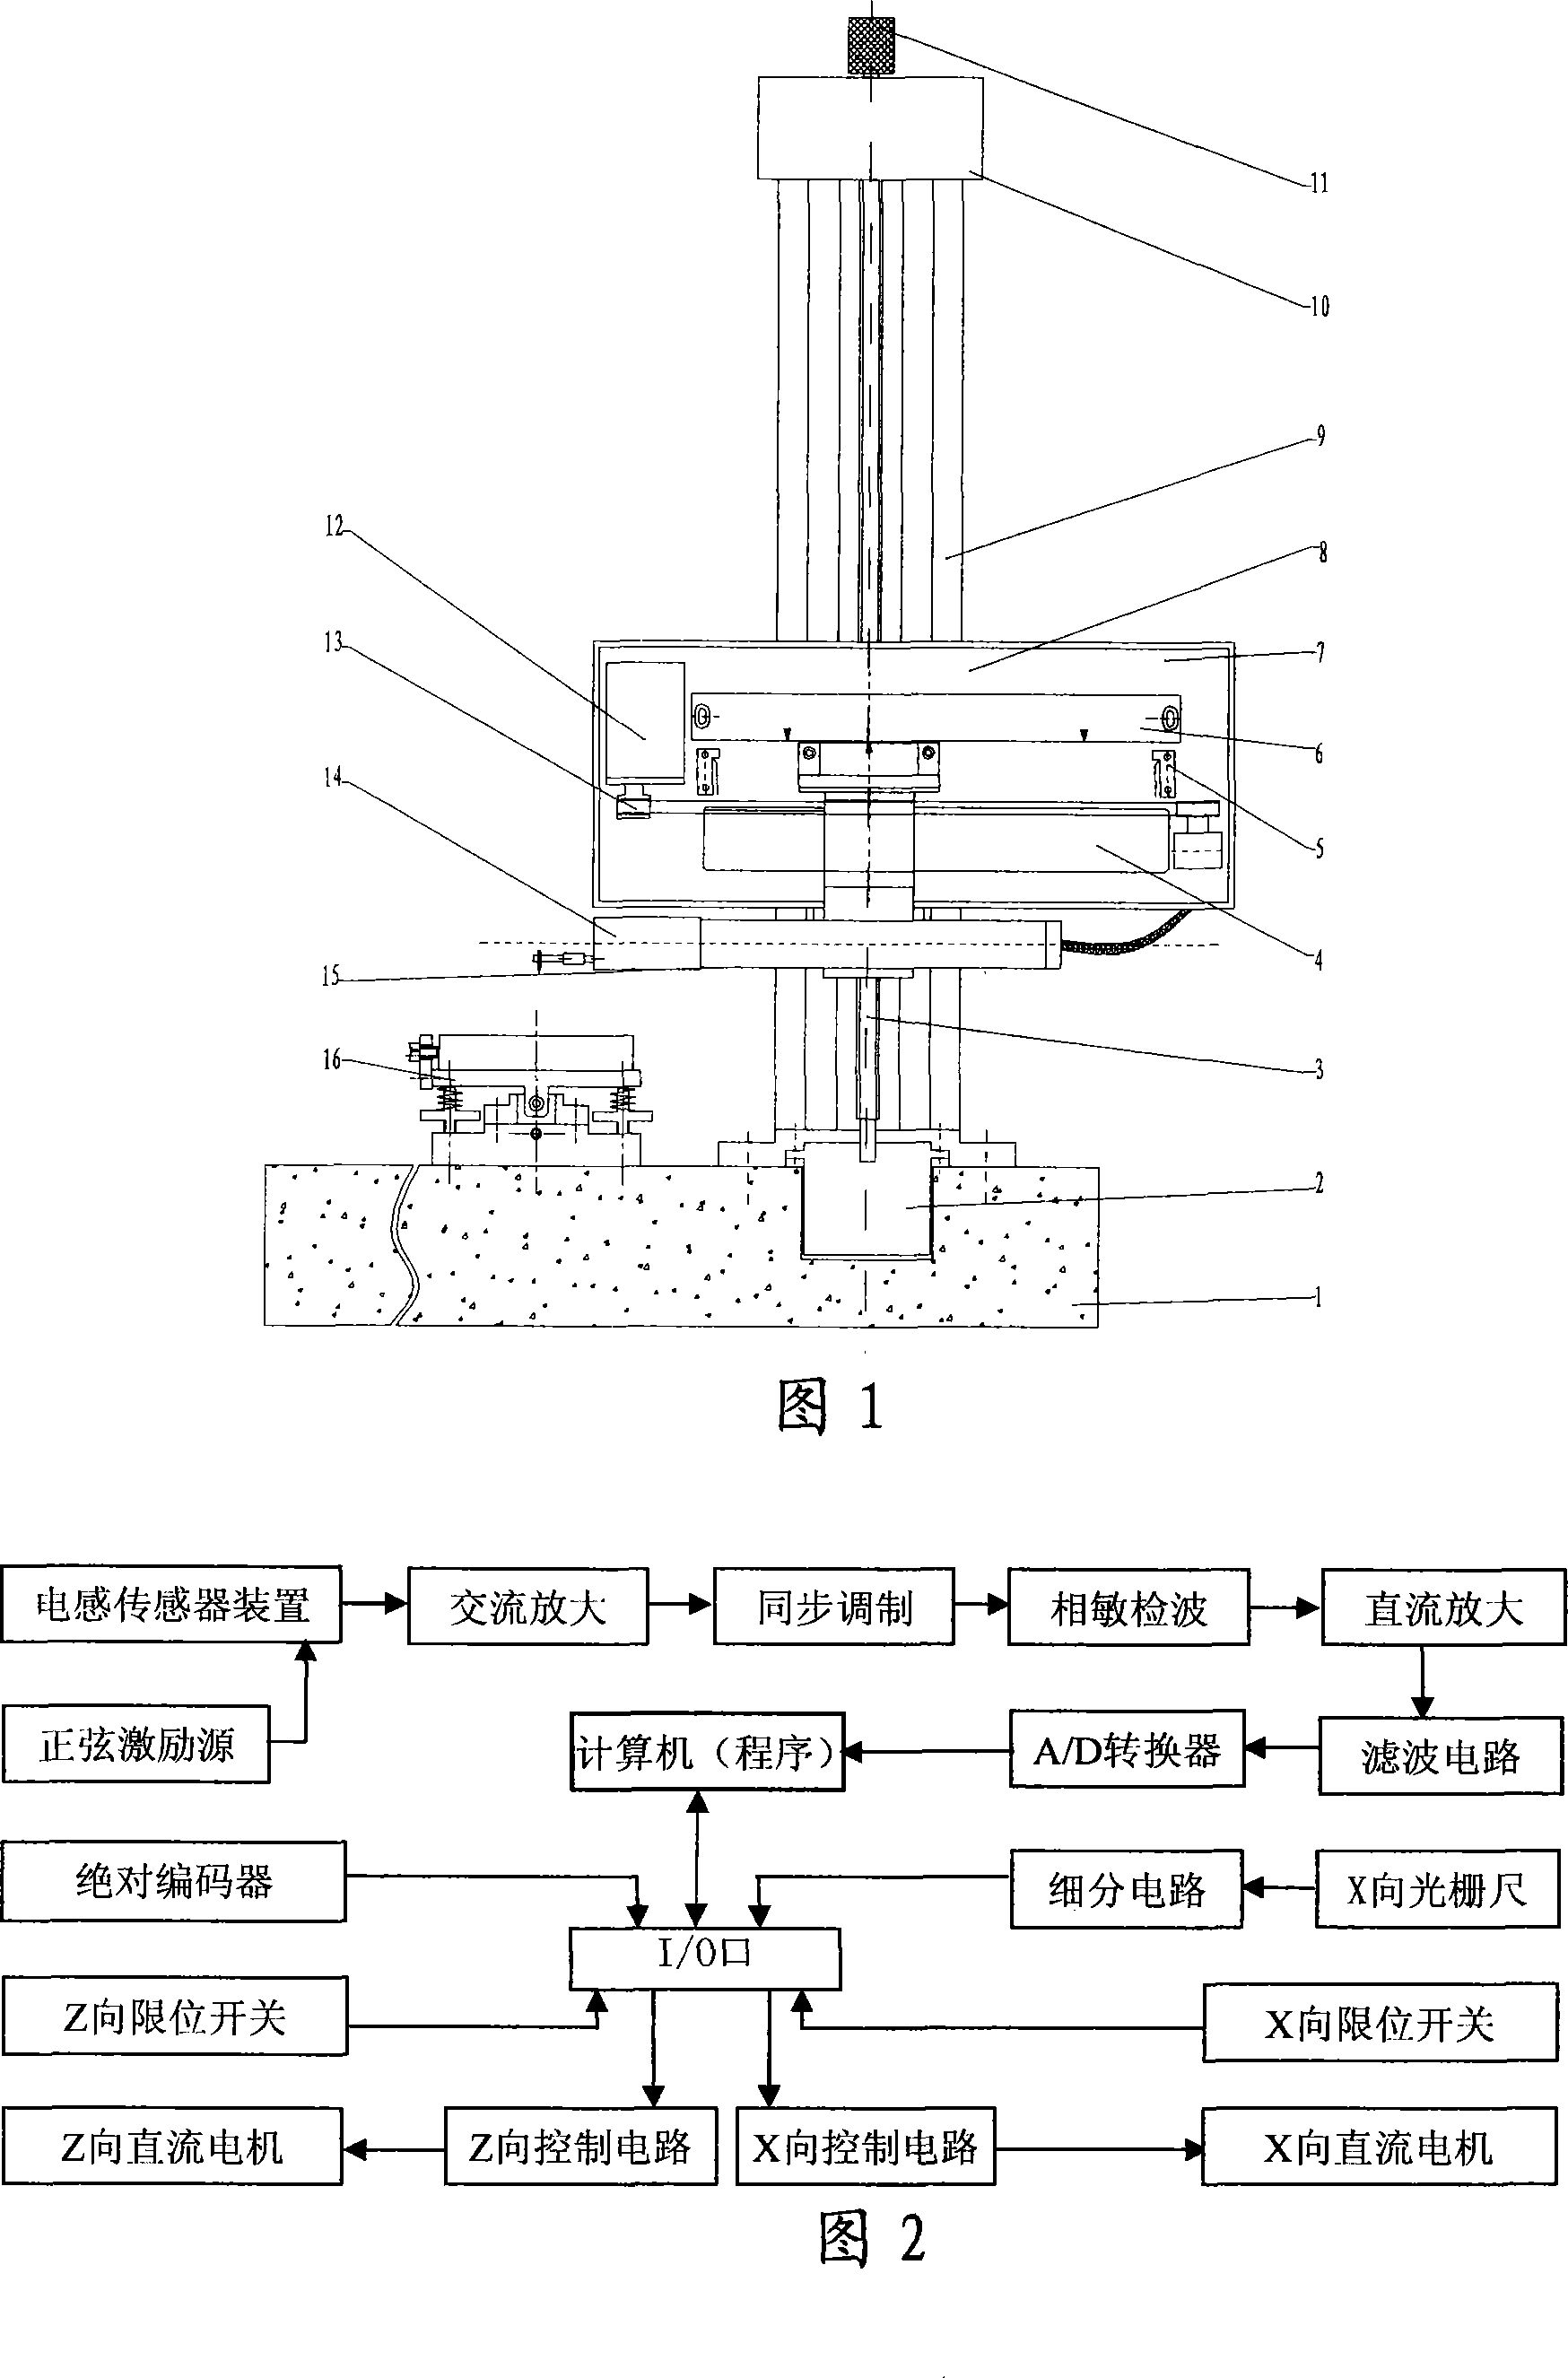 Measuring apparatus for measuring bearing and its part surface appearance